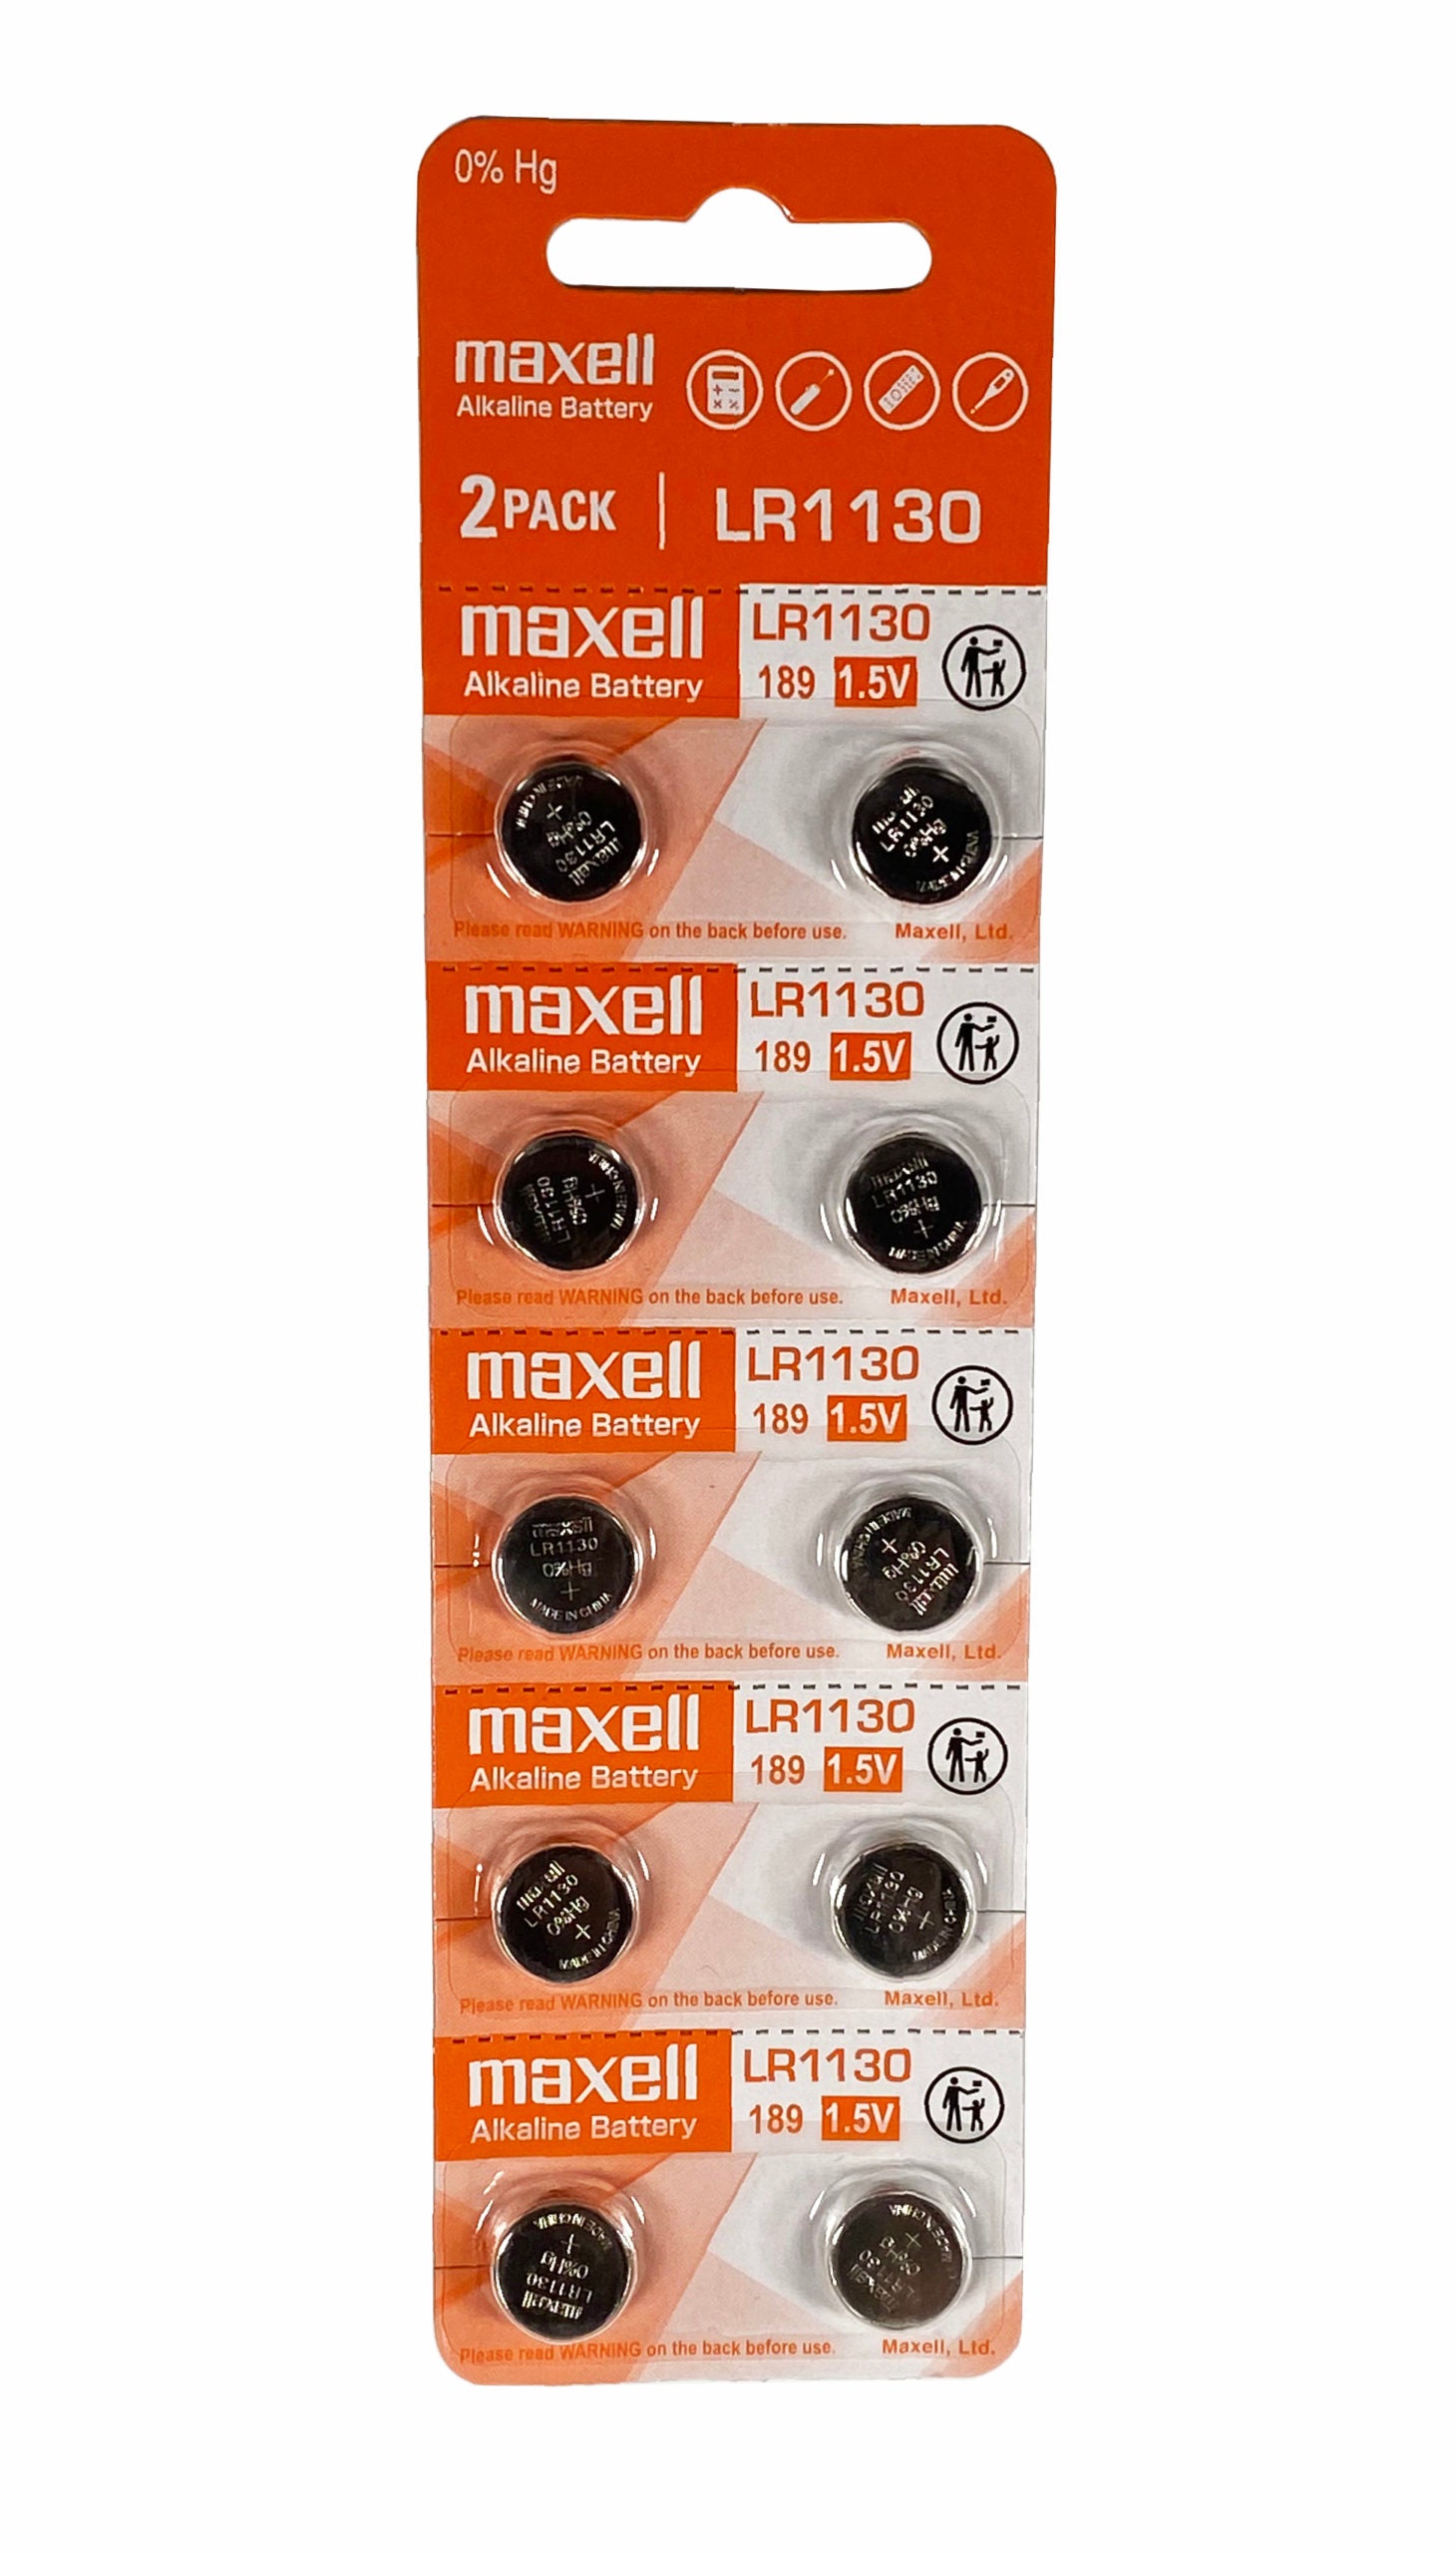  LR1130 (189) Alkaline Button Cell Battery by maxell : Health &  Household